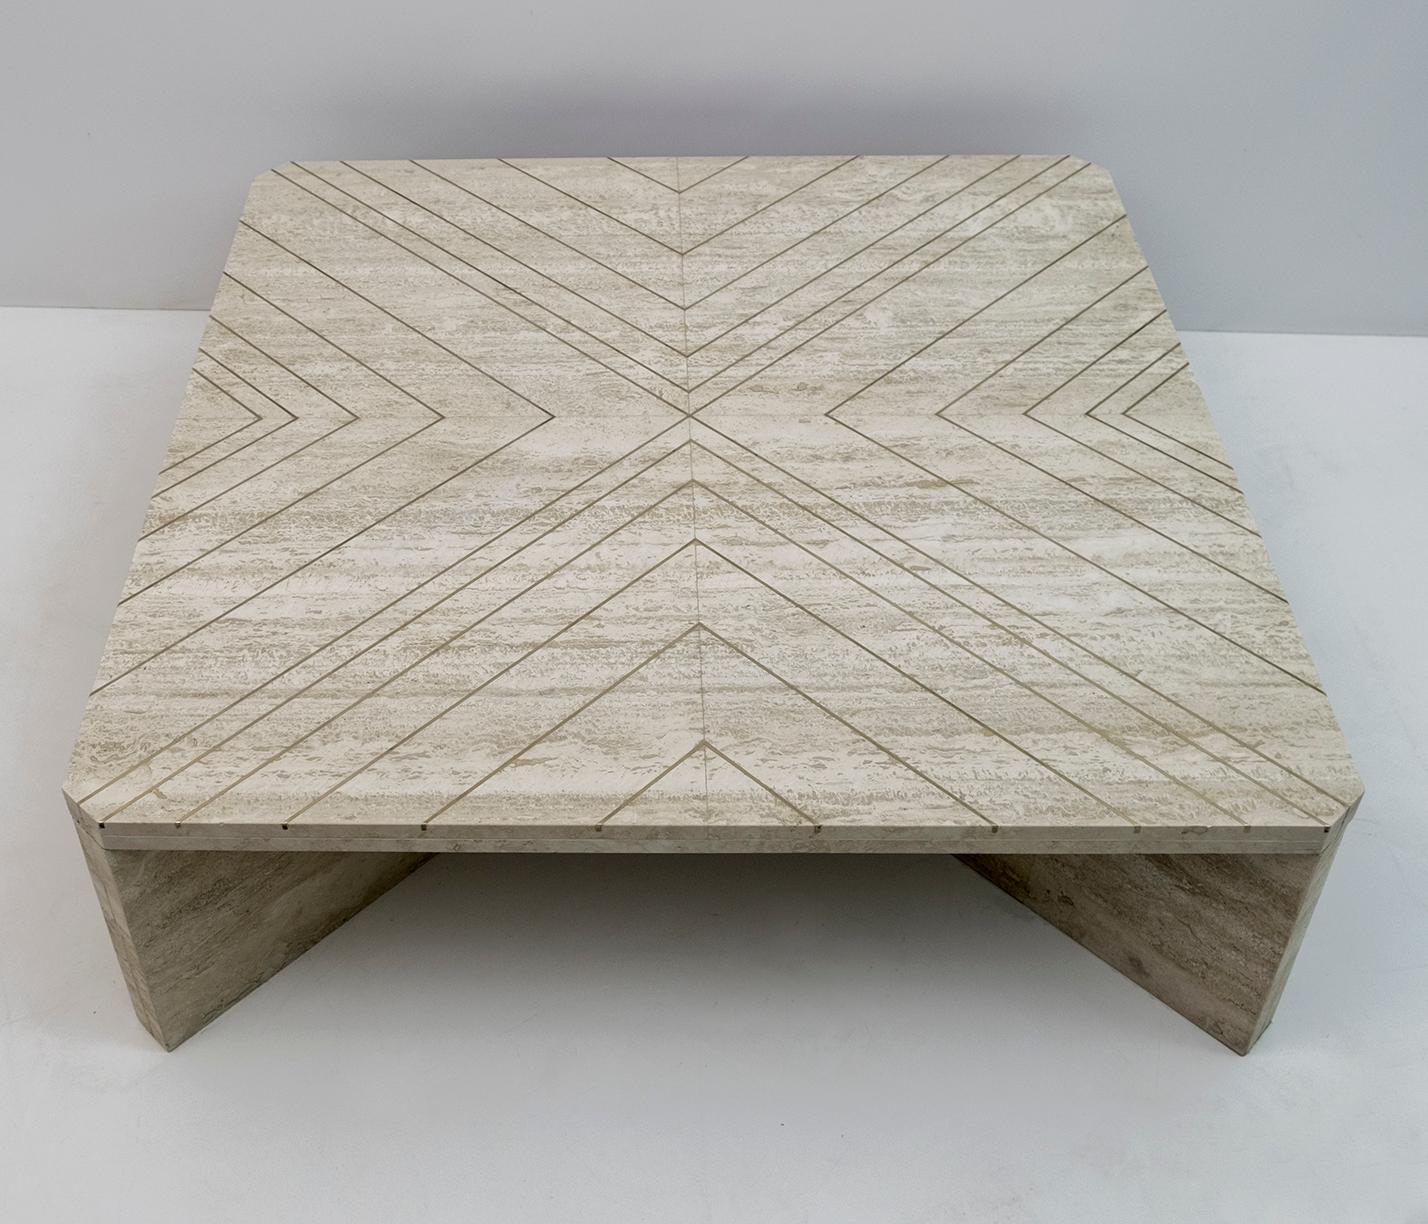 Mid-Century Modern Willy Rizzo Mid-Century Italian Travertine Coffee Table with Brass Inlays, 1970s For Sale